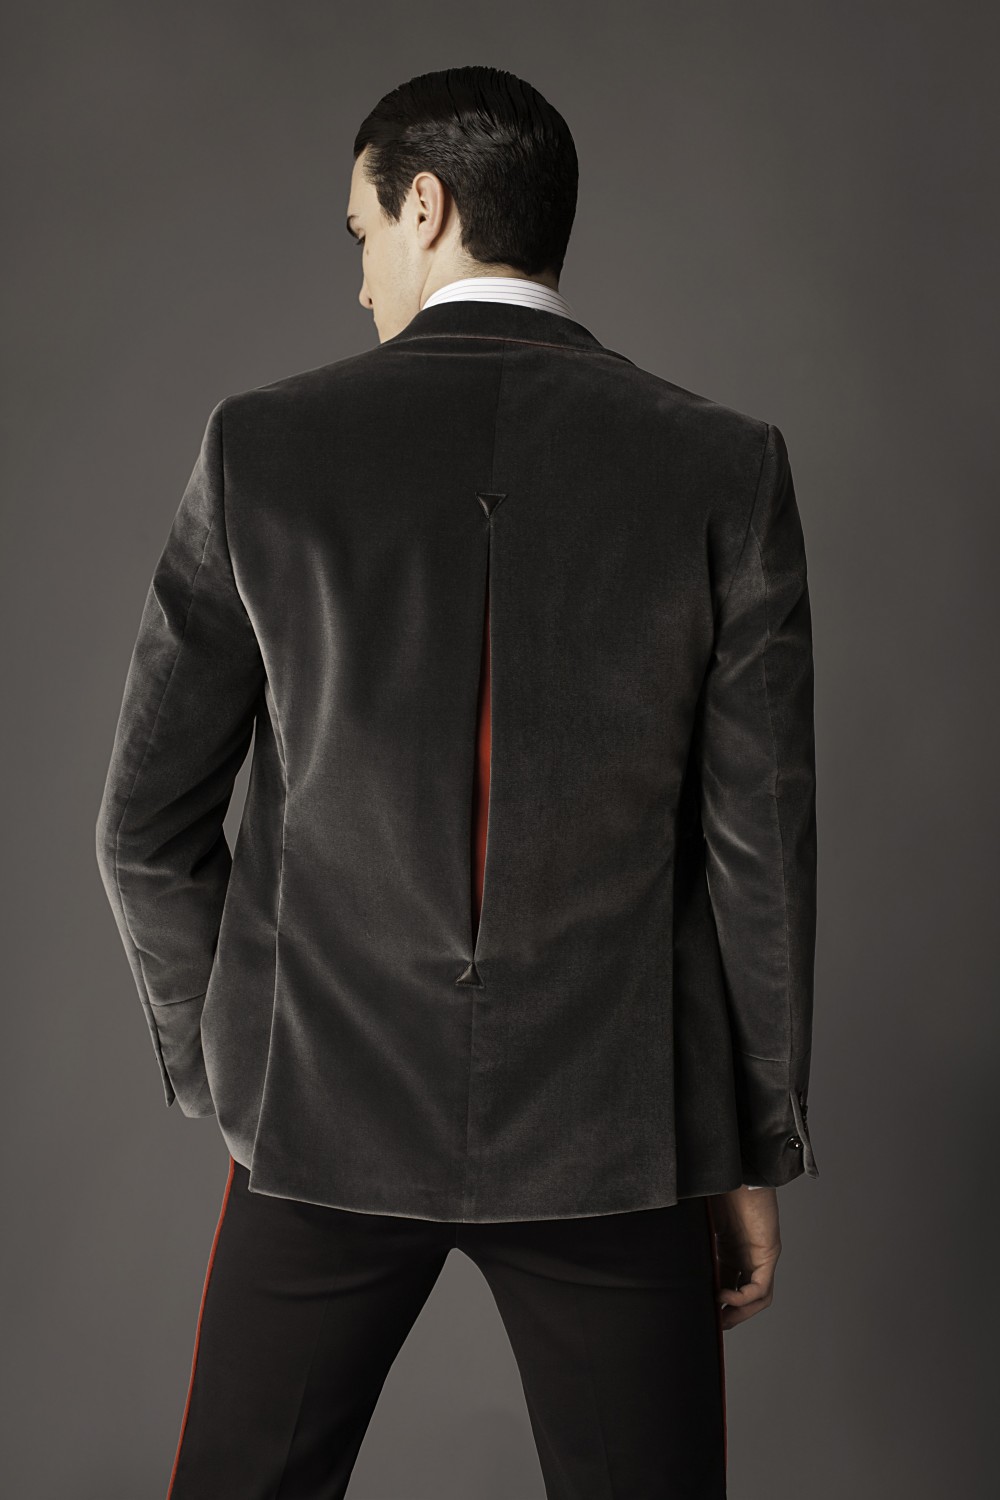 Colour: Grey - Red
Fabric: Cotton velvet - Leather
Lining: Viscose